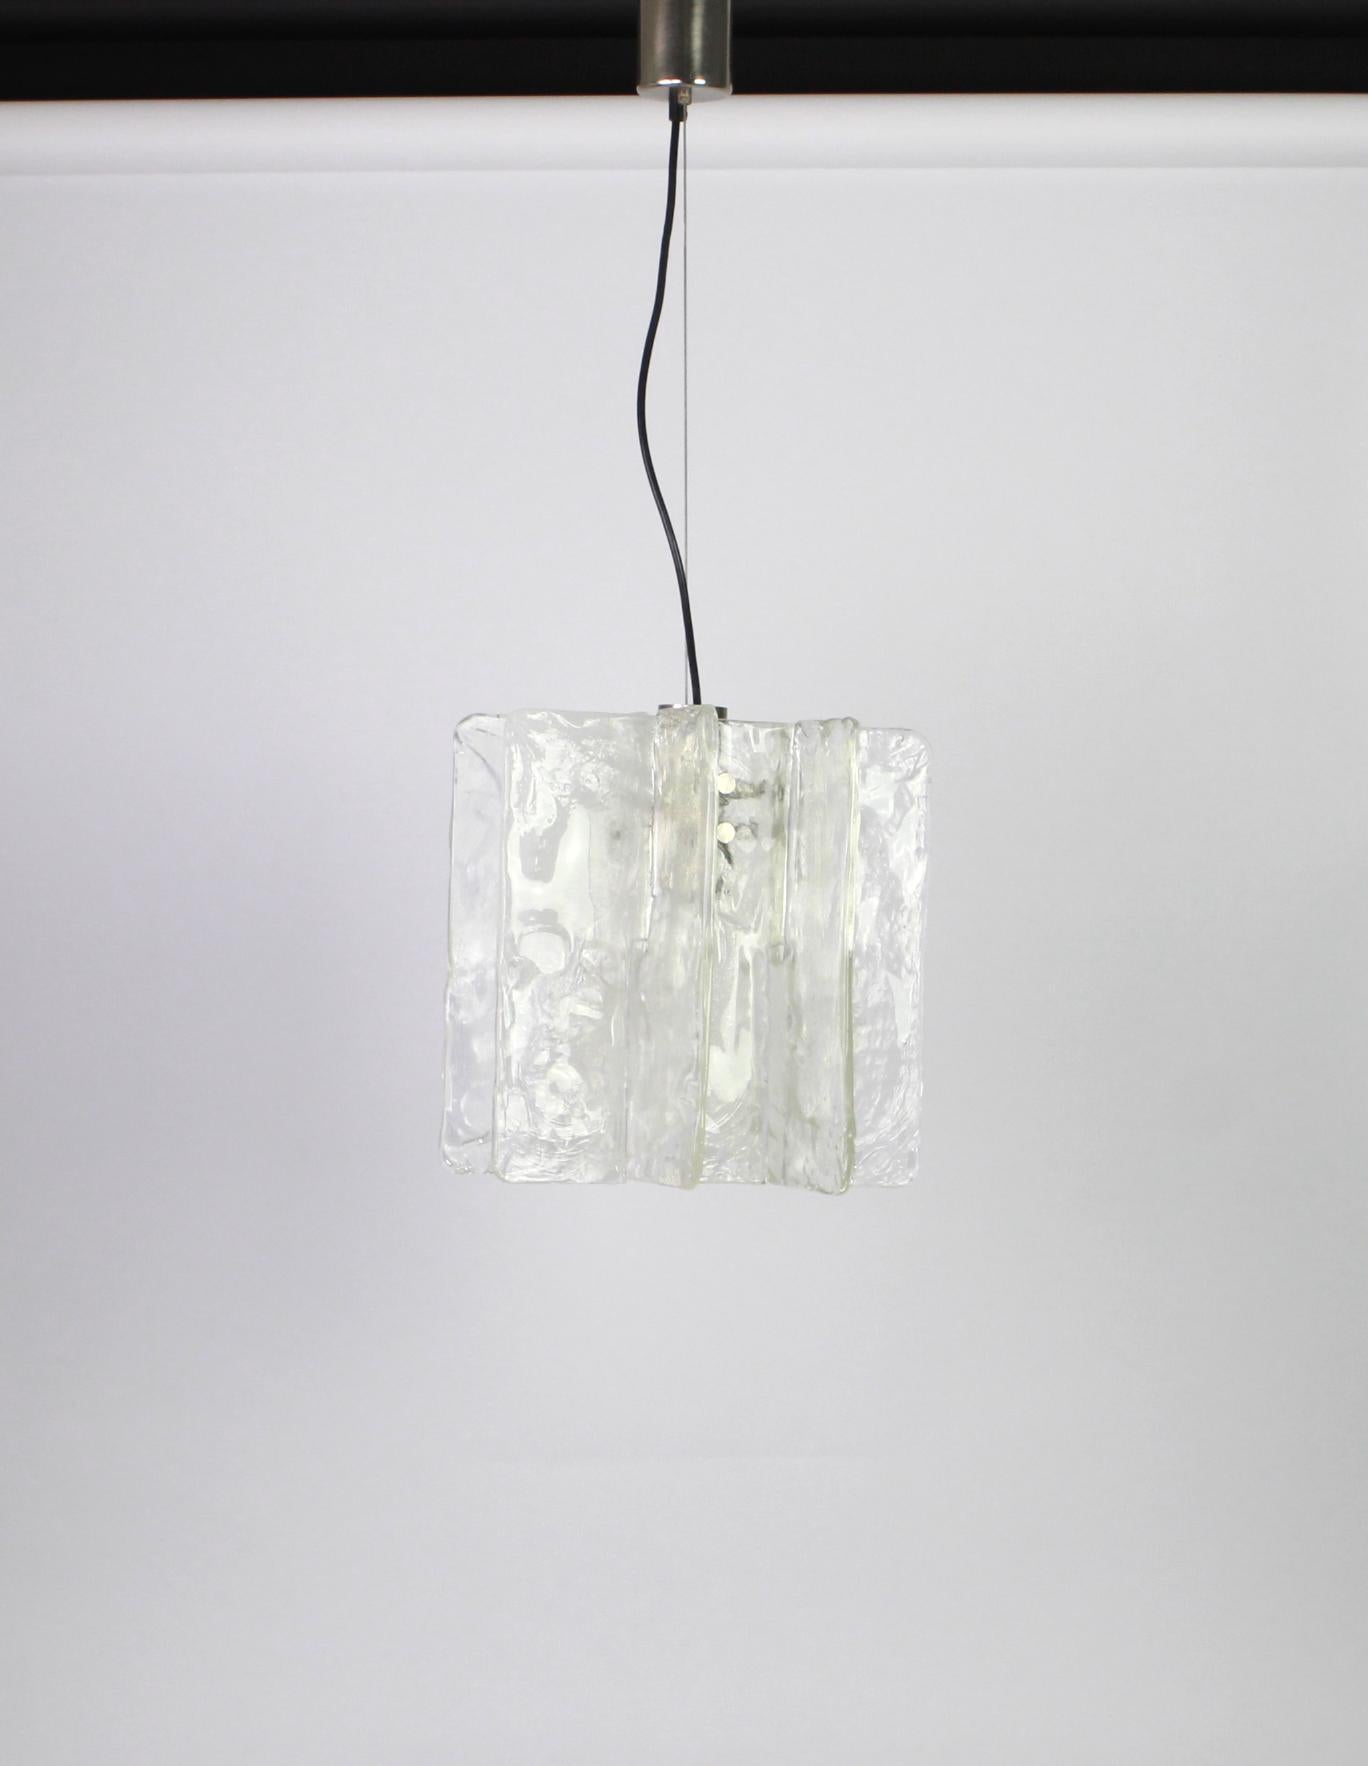 Mid-Century Modern 1 of 2 Murano Glass Chandelier Designed by Carlo Nason for Mazzega, 1970s For Sale